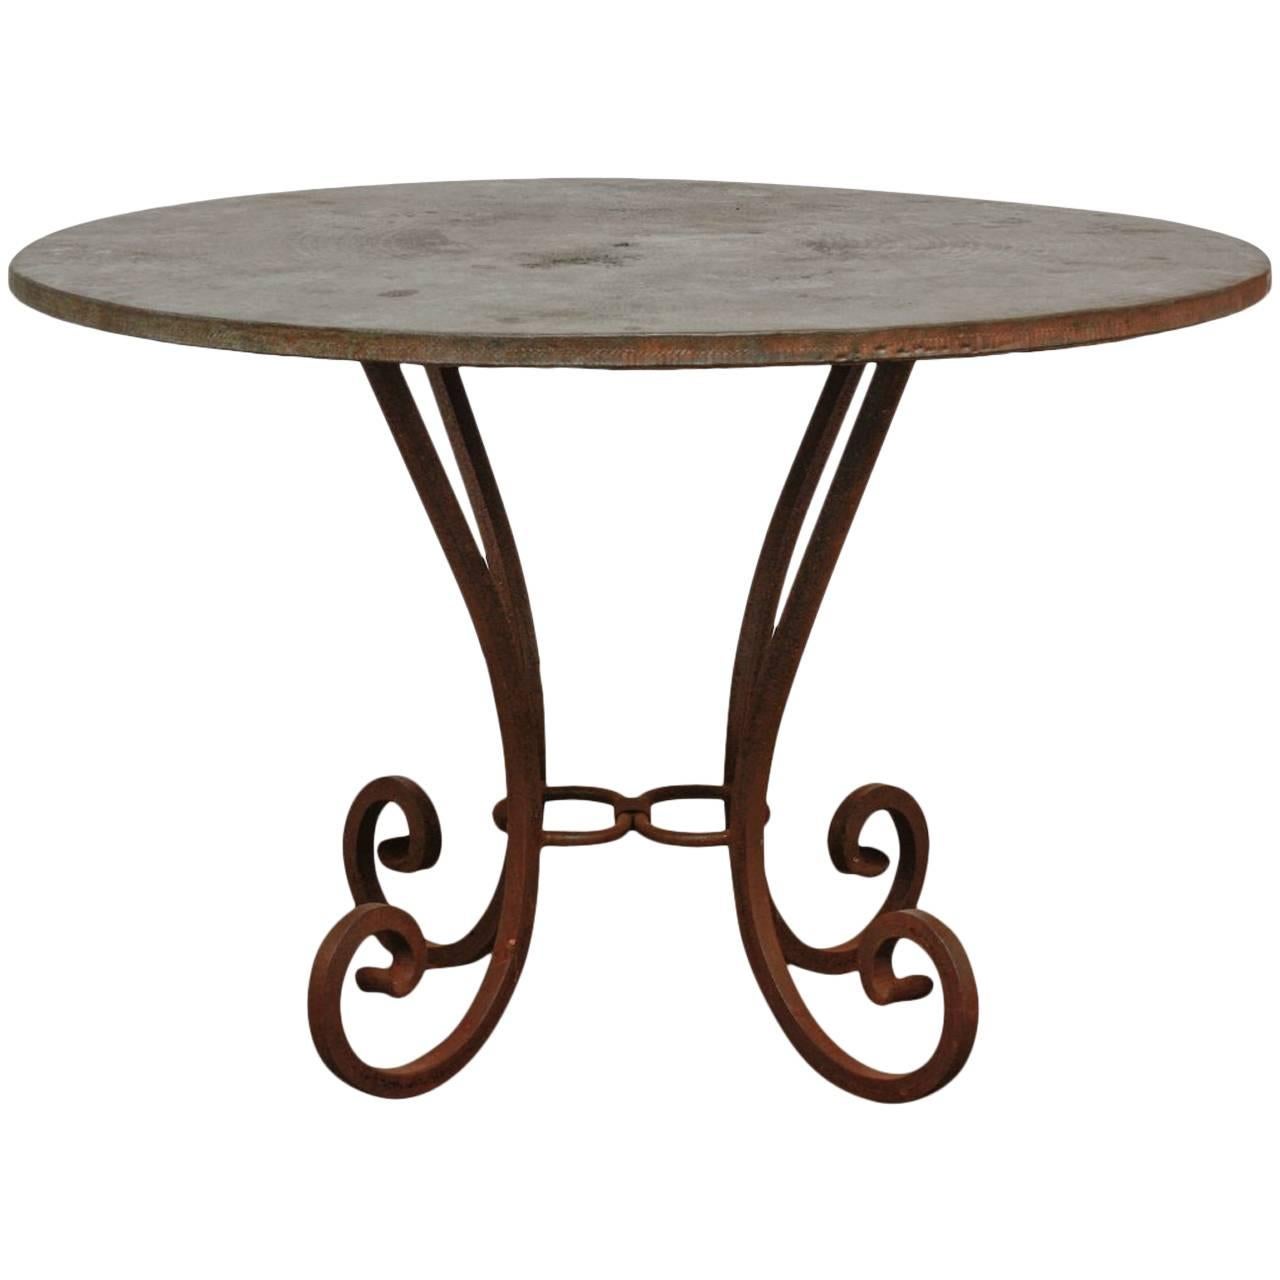 Wrought Iron and Hammered Copper Round Dining Table